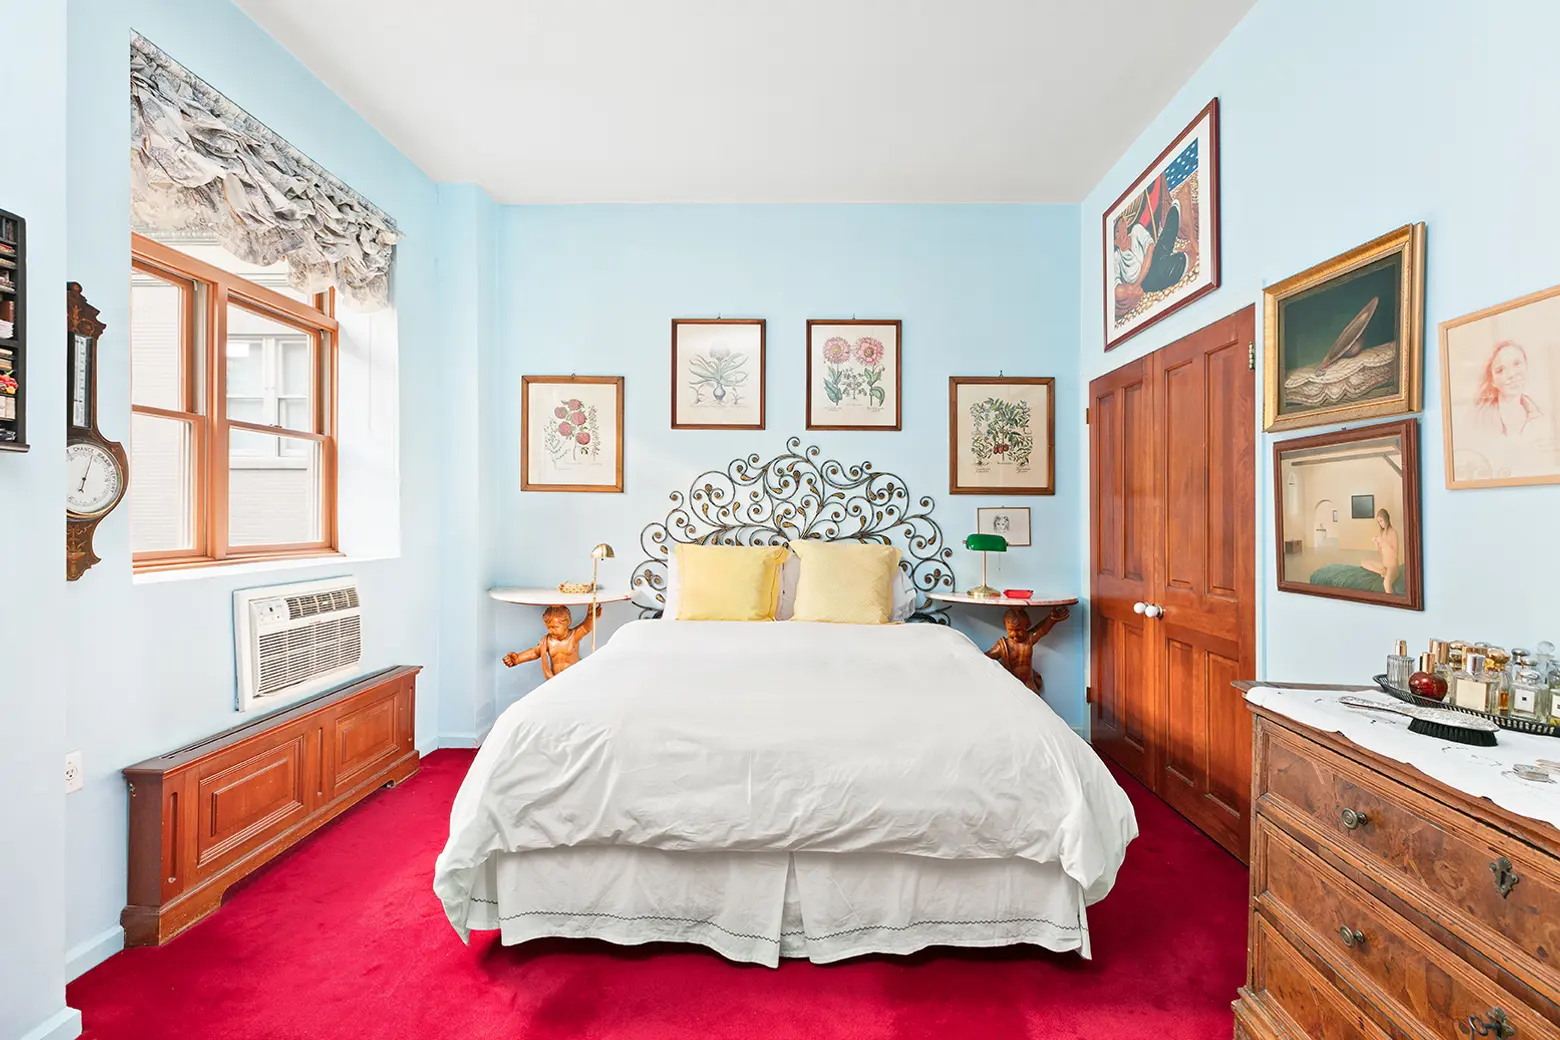 3 East 78th Street, upper east side, cool listings, mansions,condos